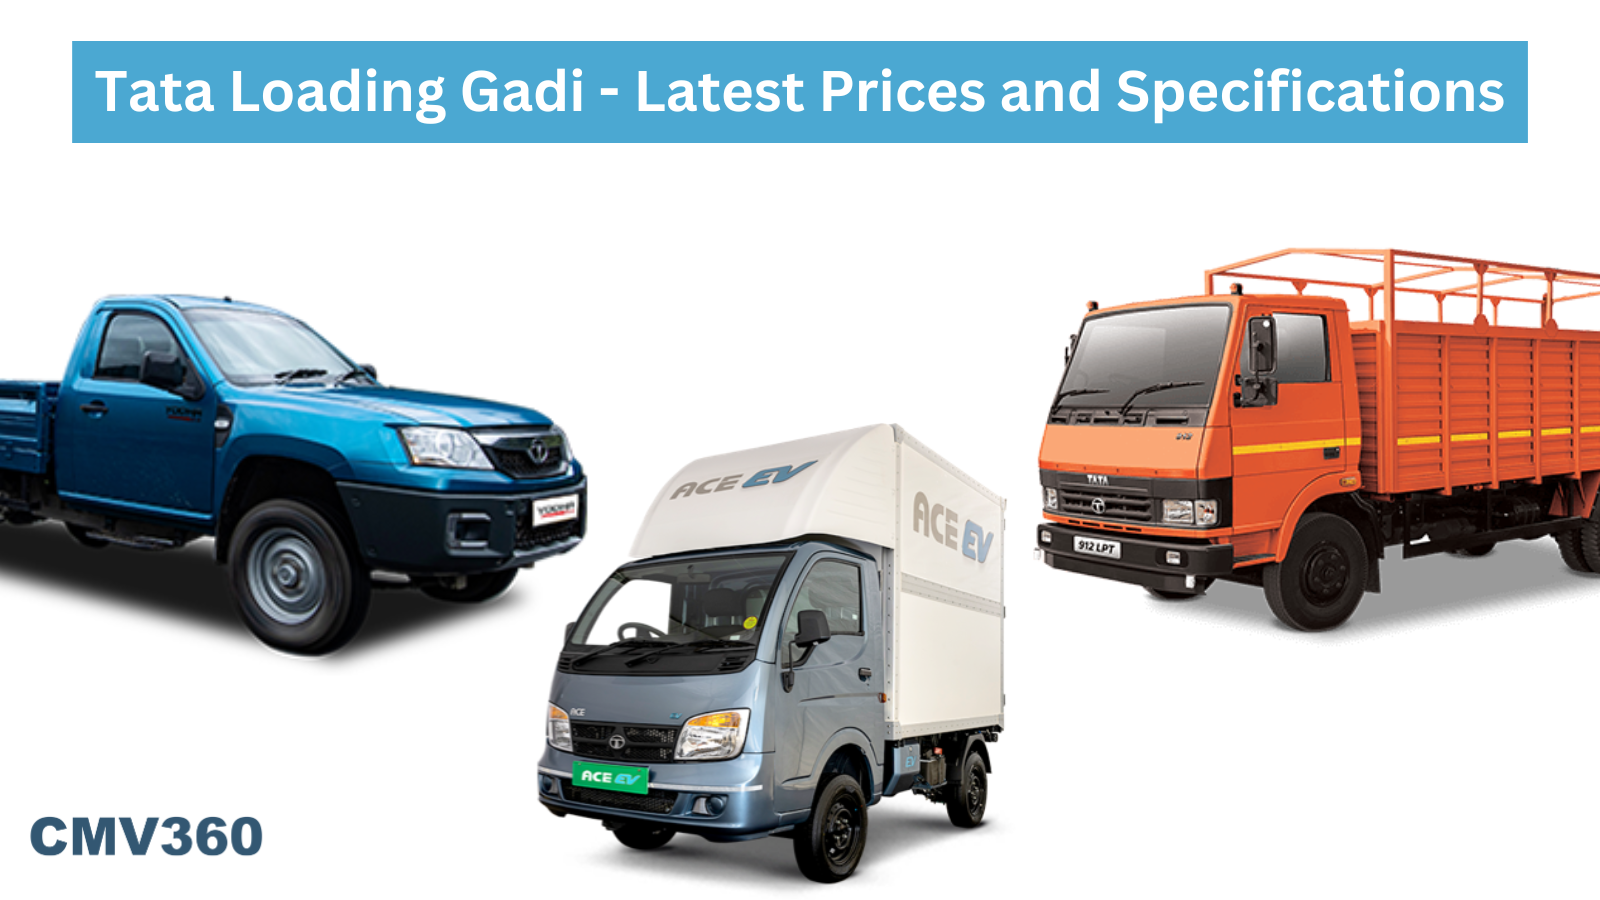 Tata Loading Gadi - Latest Prices and Specifications